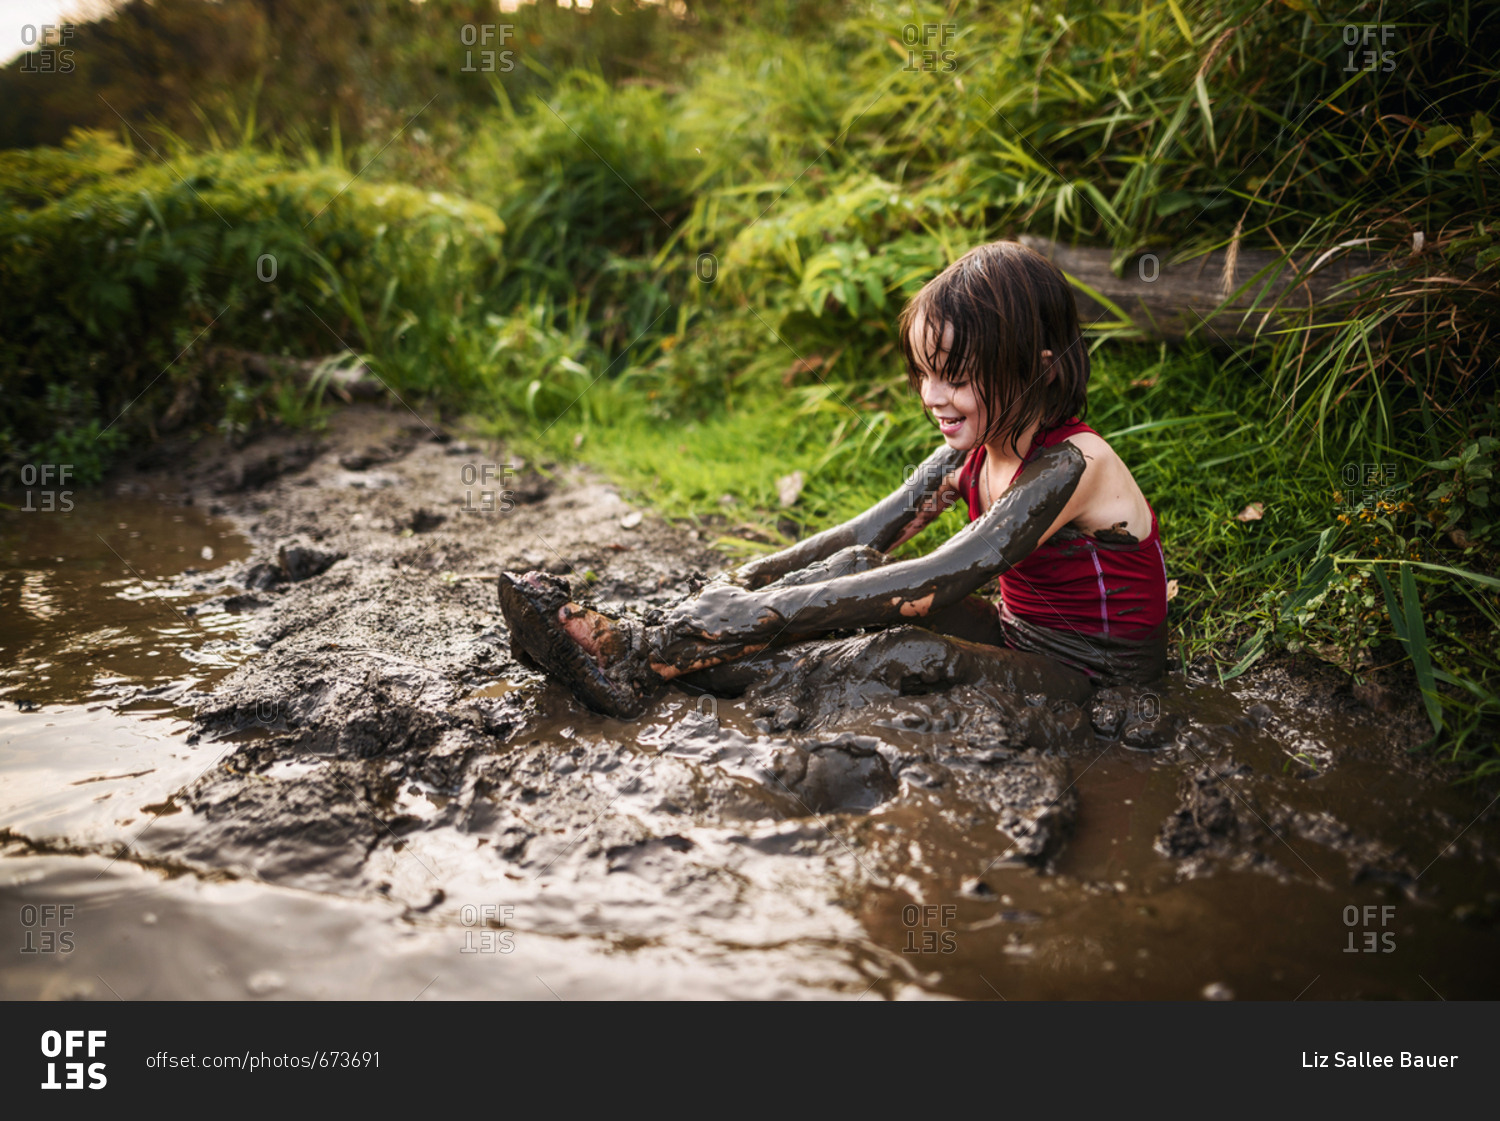 Children playing in mud - Offset stock photo - OFFSET